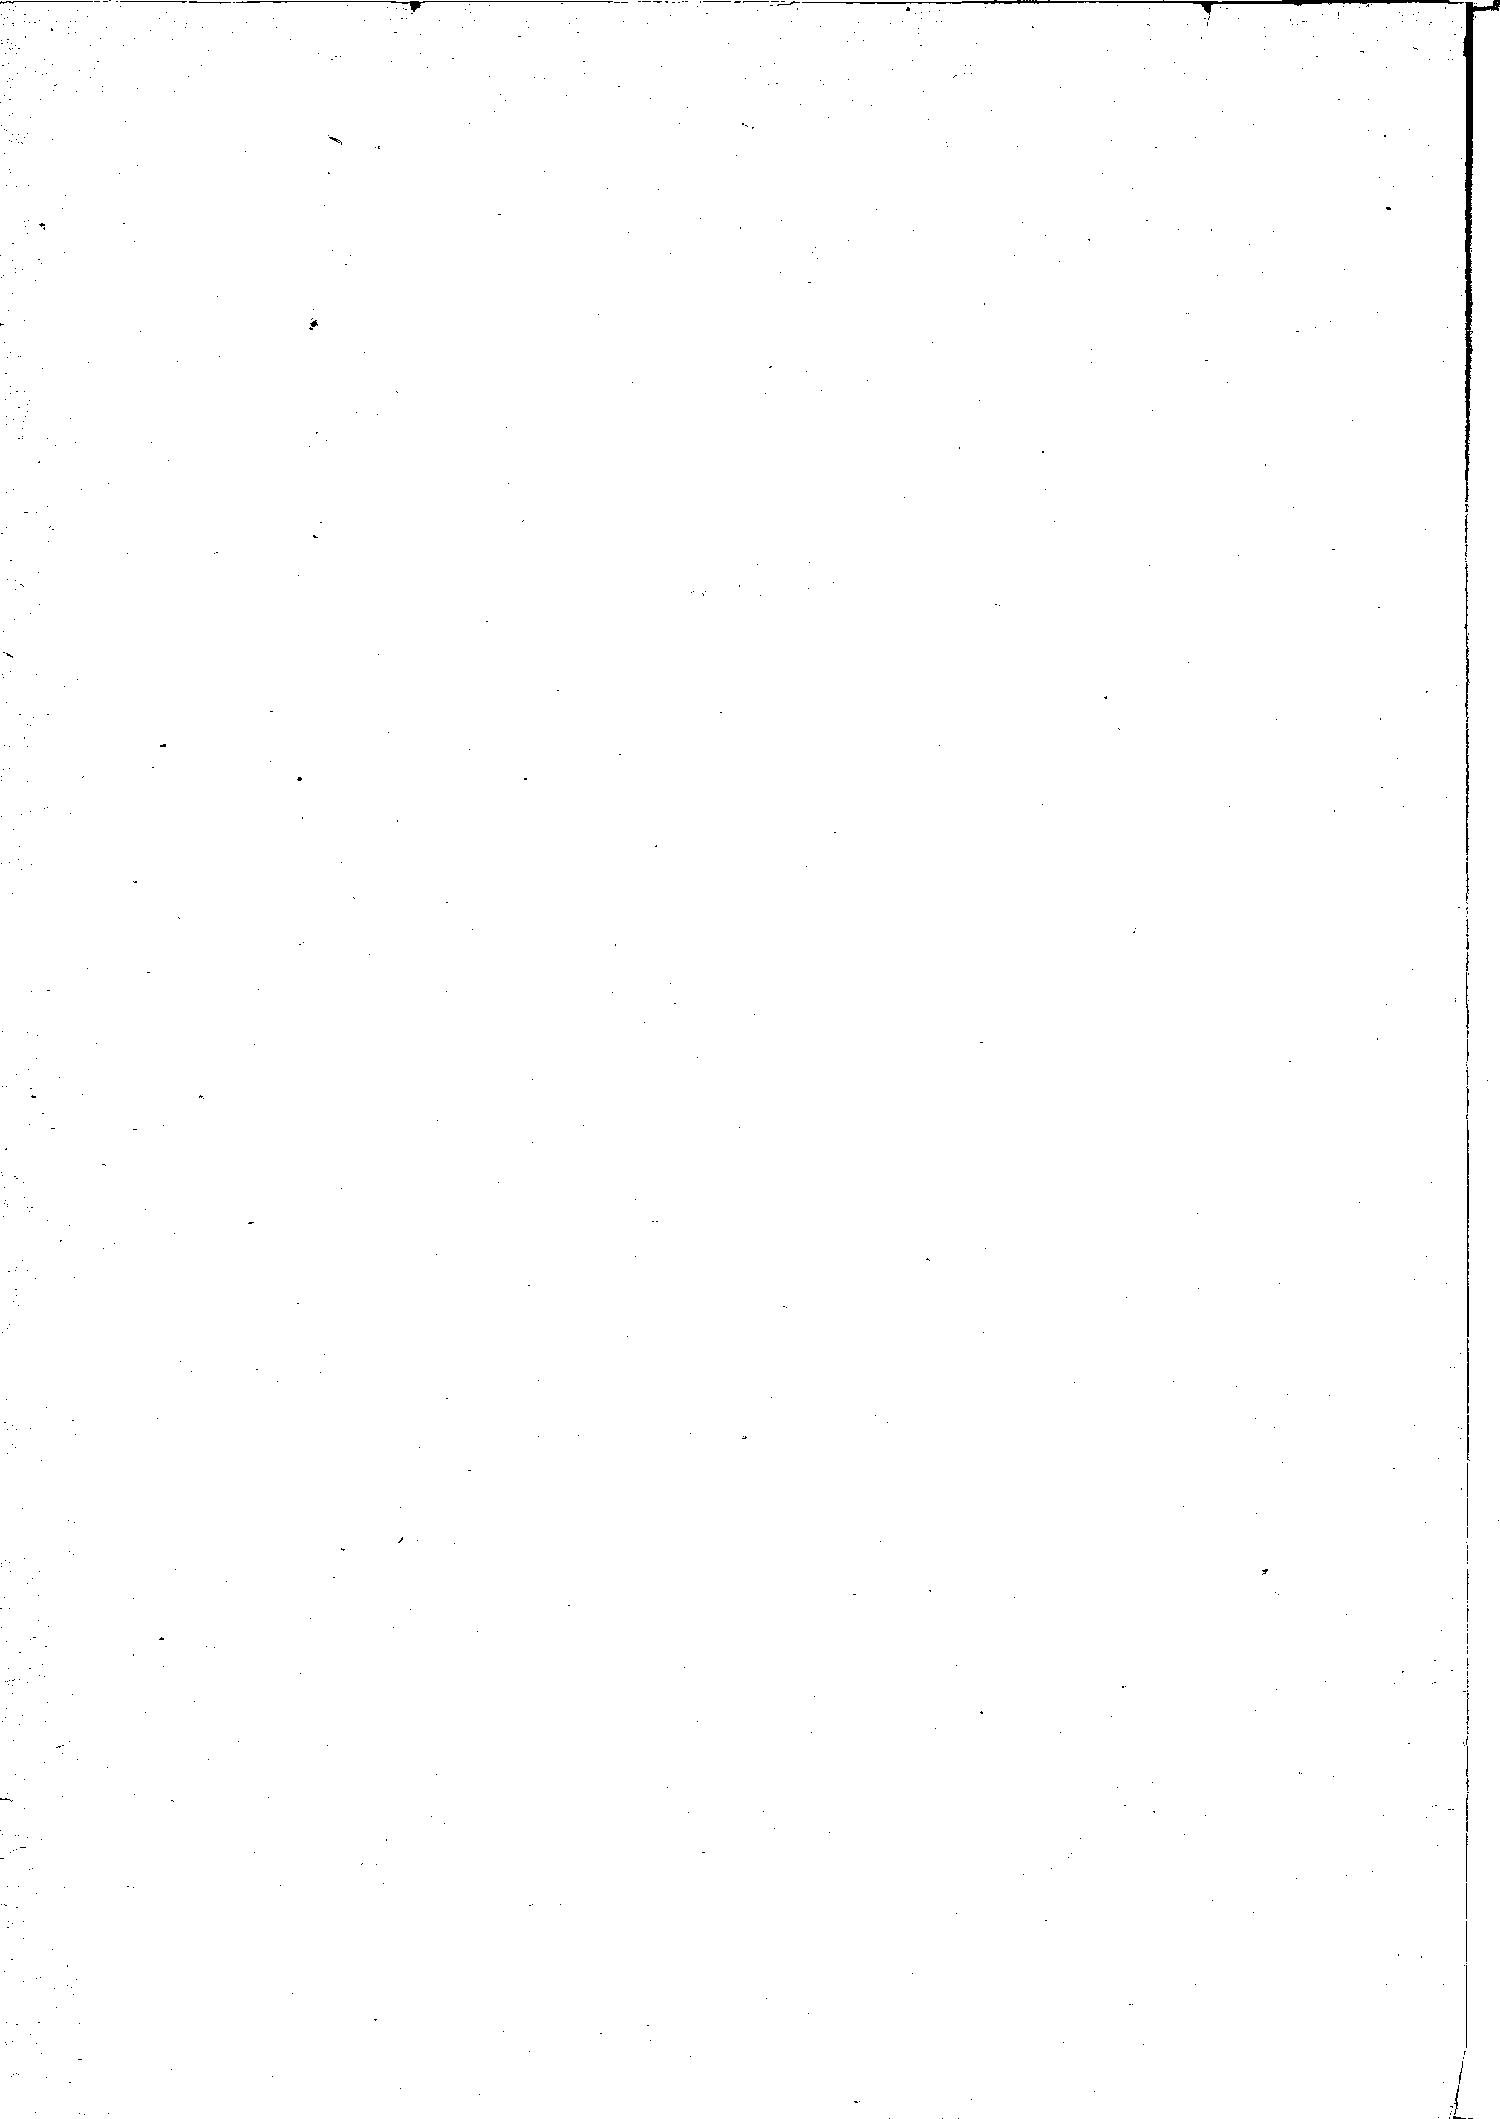 Scan of page VIII